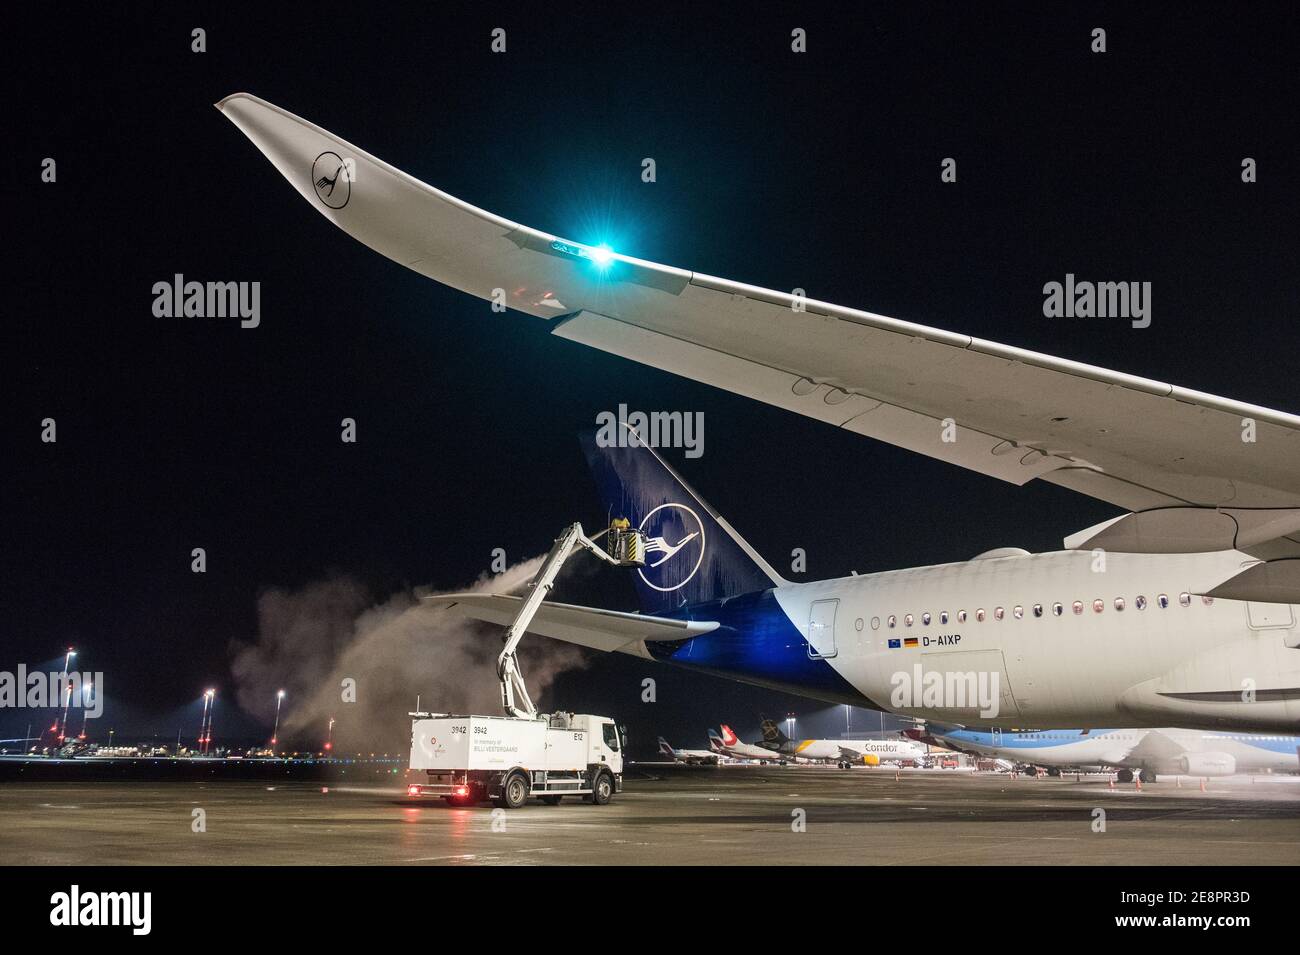 Hamburg, Germany. 31st Jan, 2021. A Lufthansa Airbus A350-900 aircraft is parked at Hamburg Airport this evening being de-iced. The aircraft has taken off on the longest non-stop passenger flight in Lufthansa's corporate history, its destination being the Mount Pleasant military base on the Falkland Islands 13,700 kilometres away. Credit: Daniel Bockwoldt/dpa/Alamy Live News Stock Photo